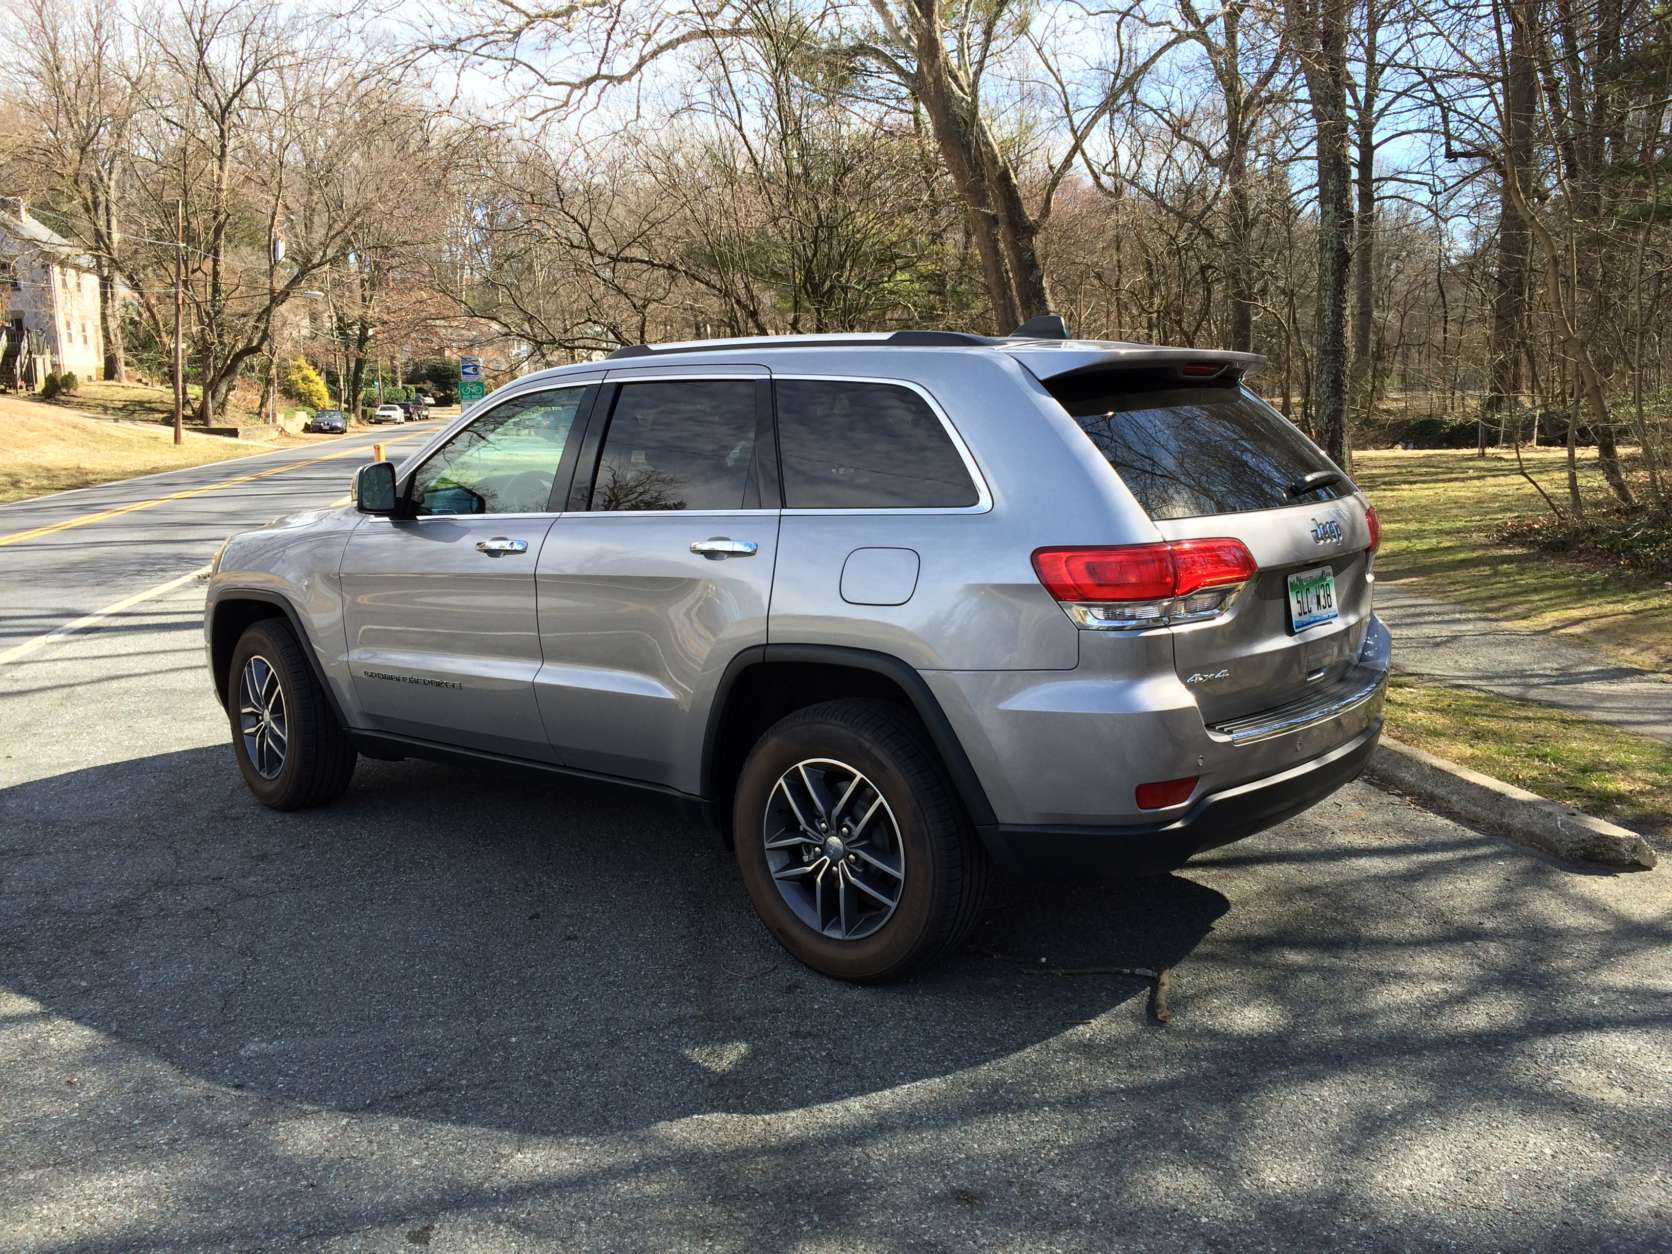 Car reviewer Mike Parris says the ride was very good in the 2017 Jeep Grand Cherokee, with most bumps being dealt with without upsetting the ride. He says the smaller 18-inch wheels help out on the drive. (WTOP/Mike Parris)